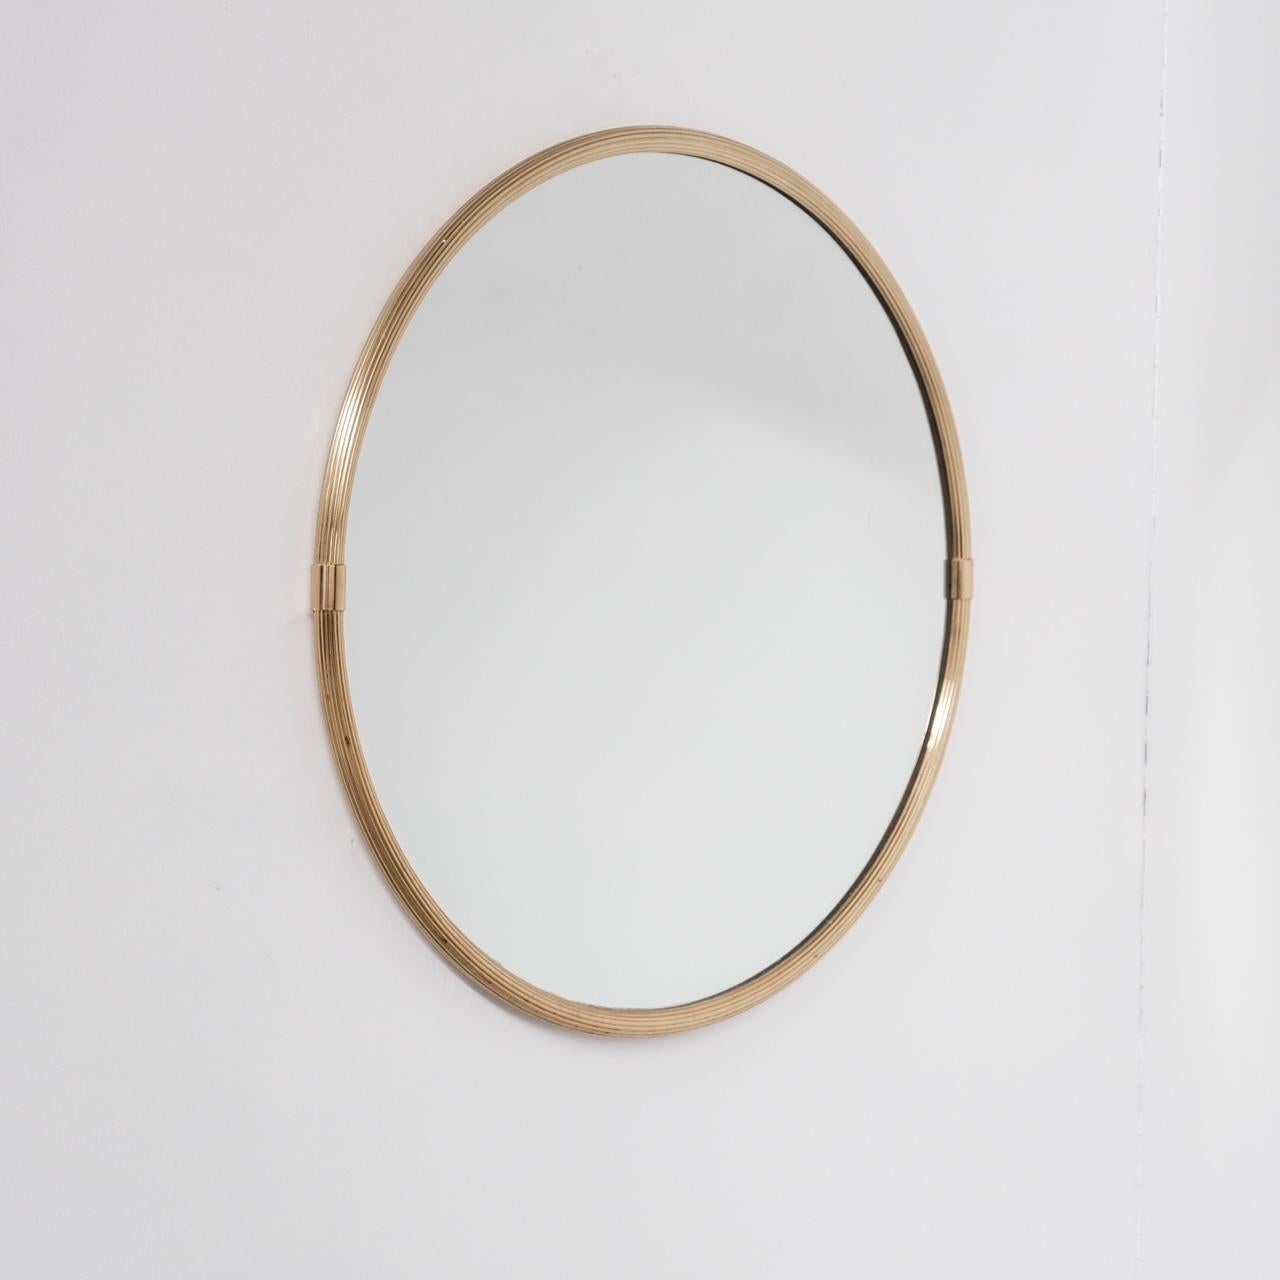 A brass Scandinavian circular mirror.

Denmark, c1960s.

Good condition, some scuffs and light surface scratches commensurate with age.

Location: Belgium Gallery.

Dimensions: 2.5 D x 61 Diameter in cm.

Delivery: POA

We can ship